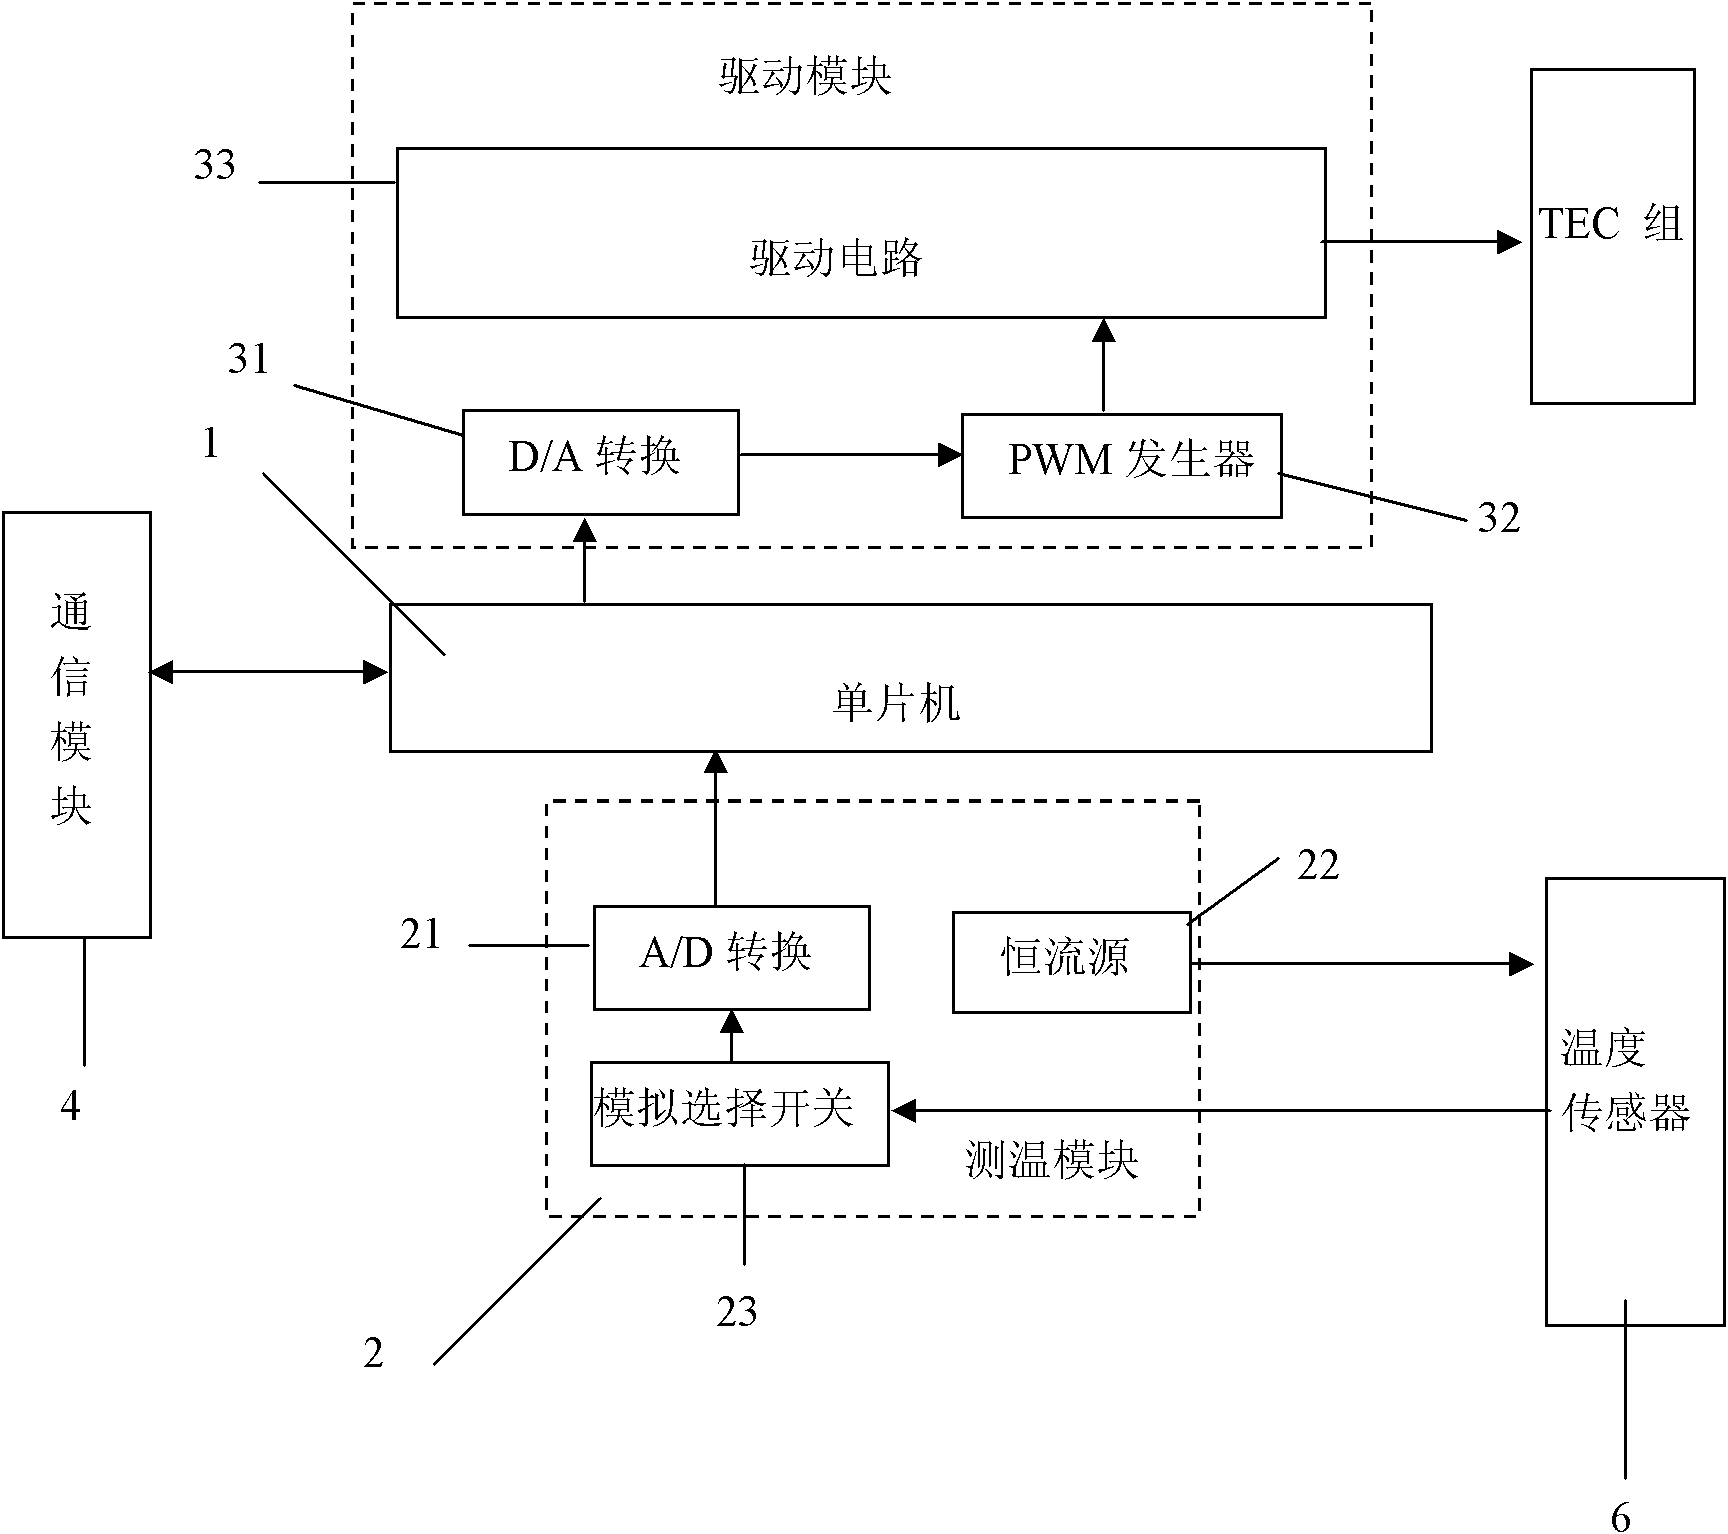 Single chip computer-based multi-TEC (Thermoelectric Cooler) temperature-regulated control system